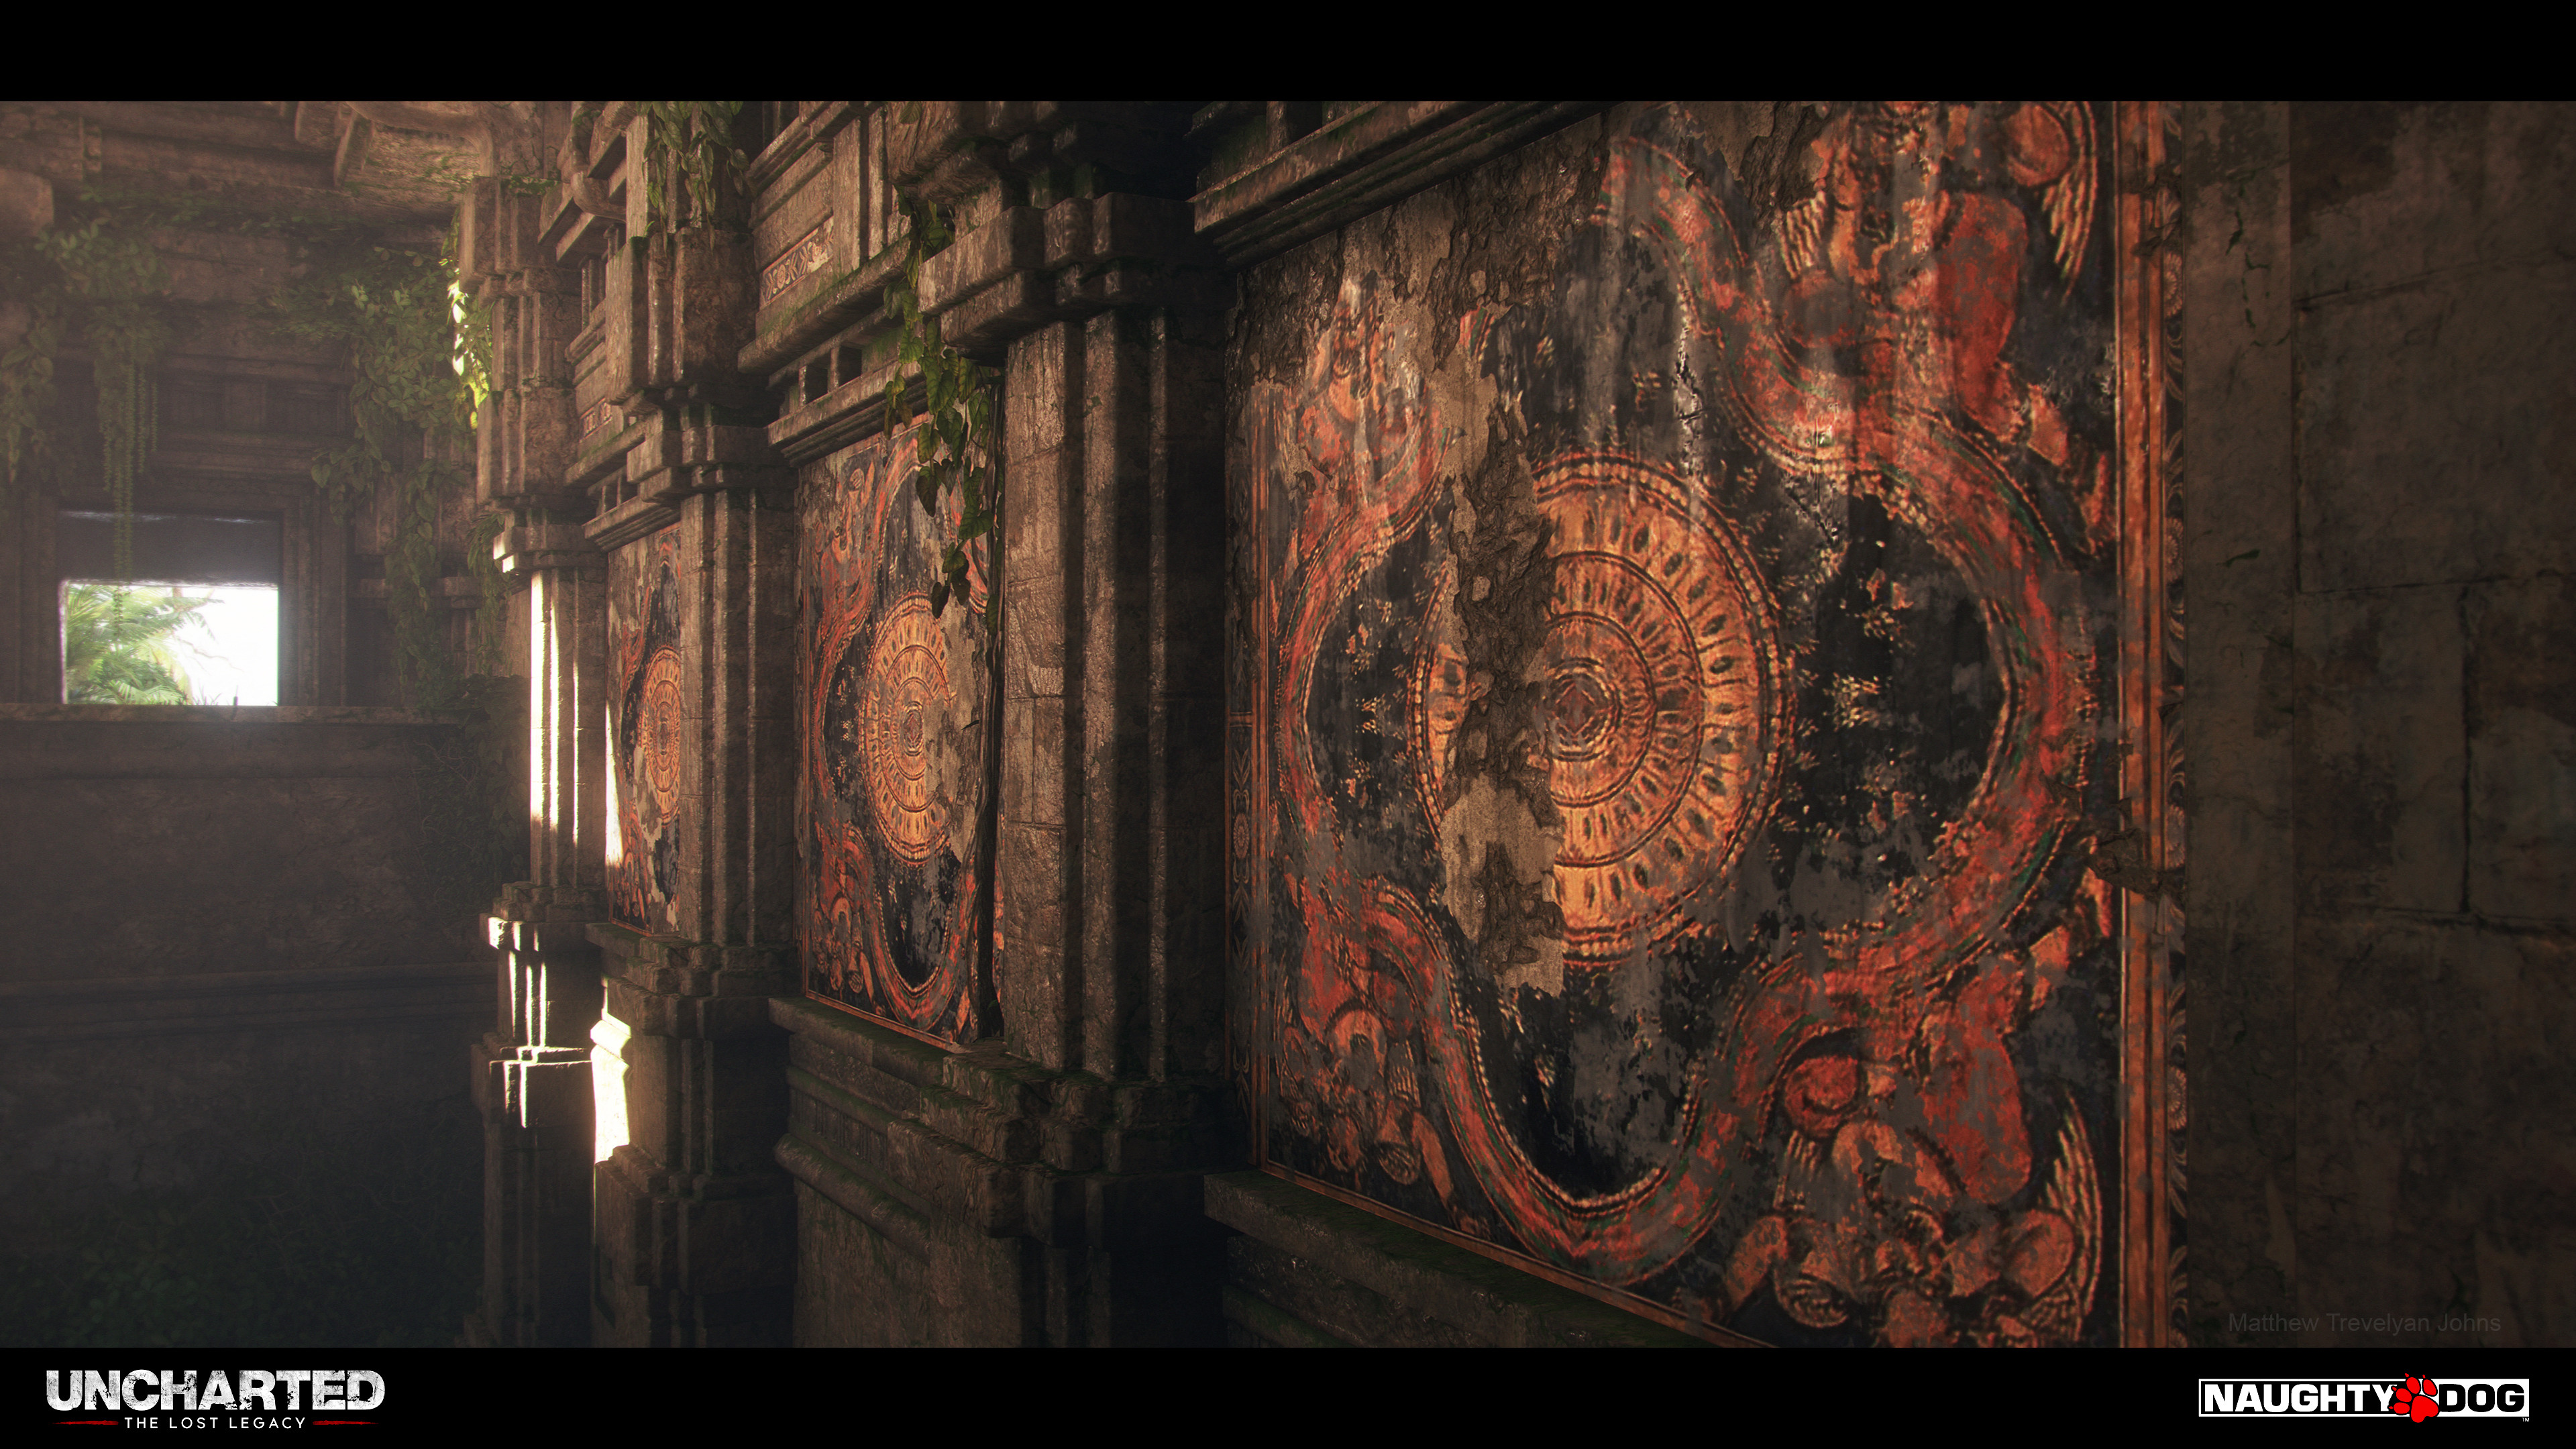 *multi-layered shaders allowed me to dynamically add damage, wetness and paint flaking to these murals*
